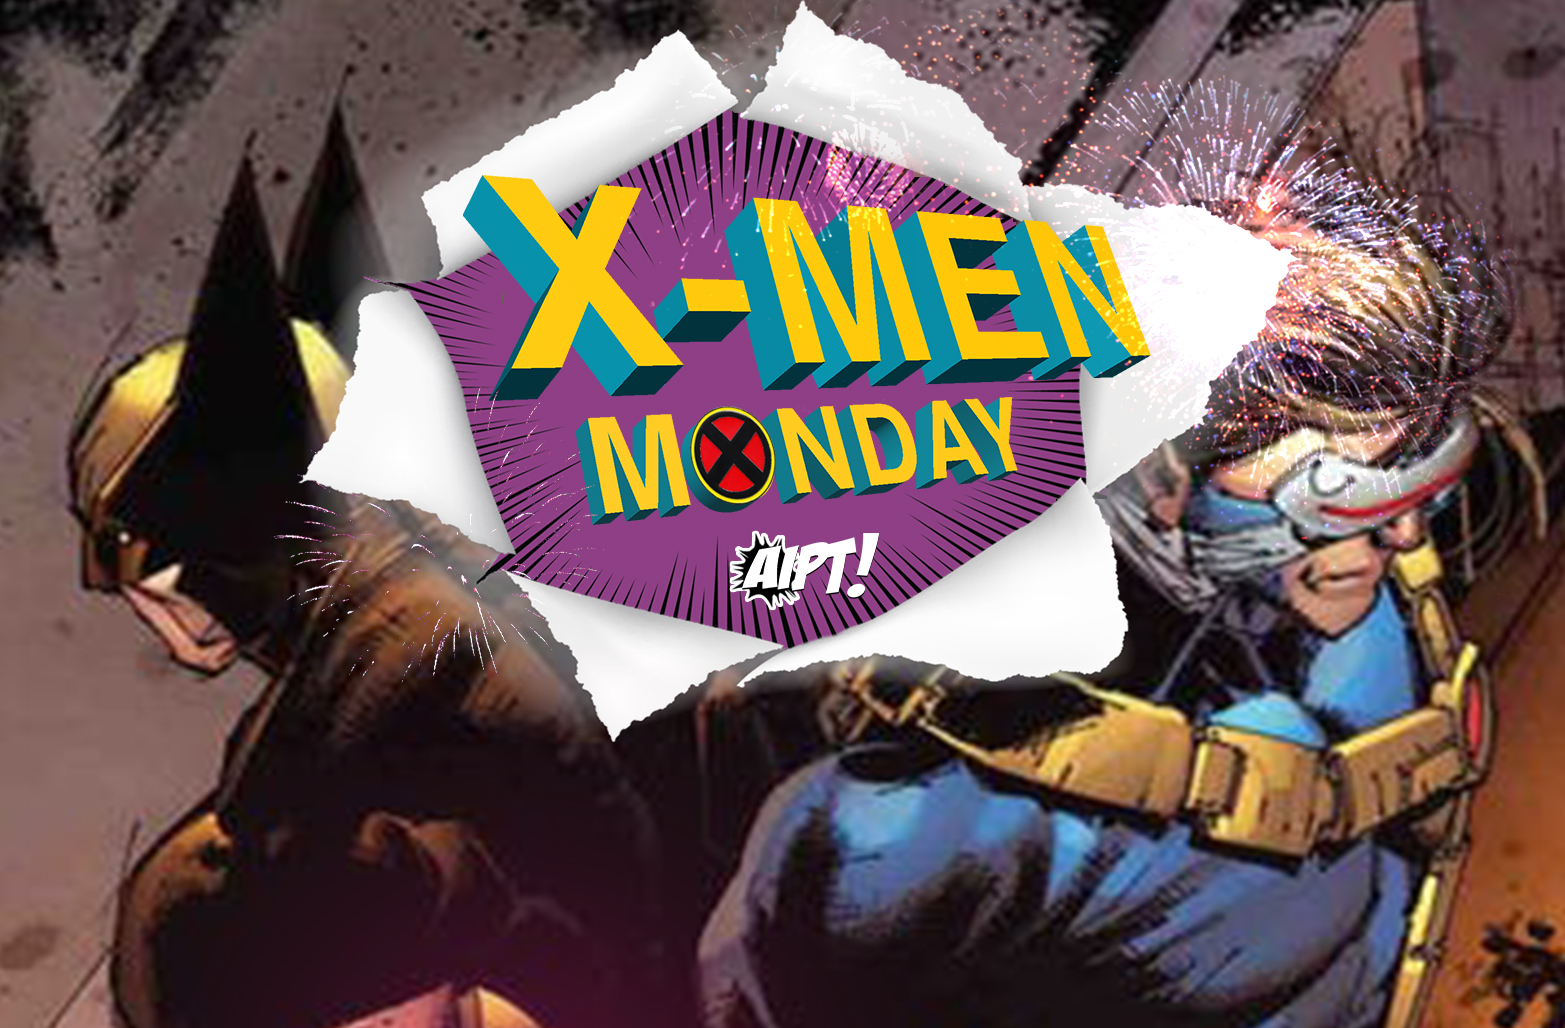 X-Men Monday #10 - Cyclops' return, House of X costumes and advice for Kevin Feige